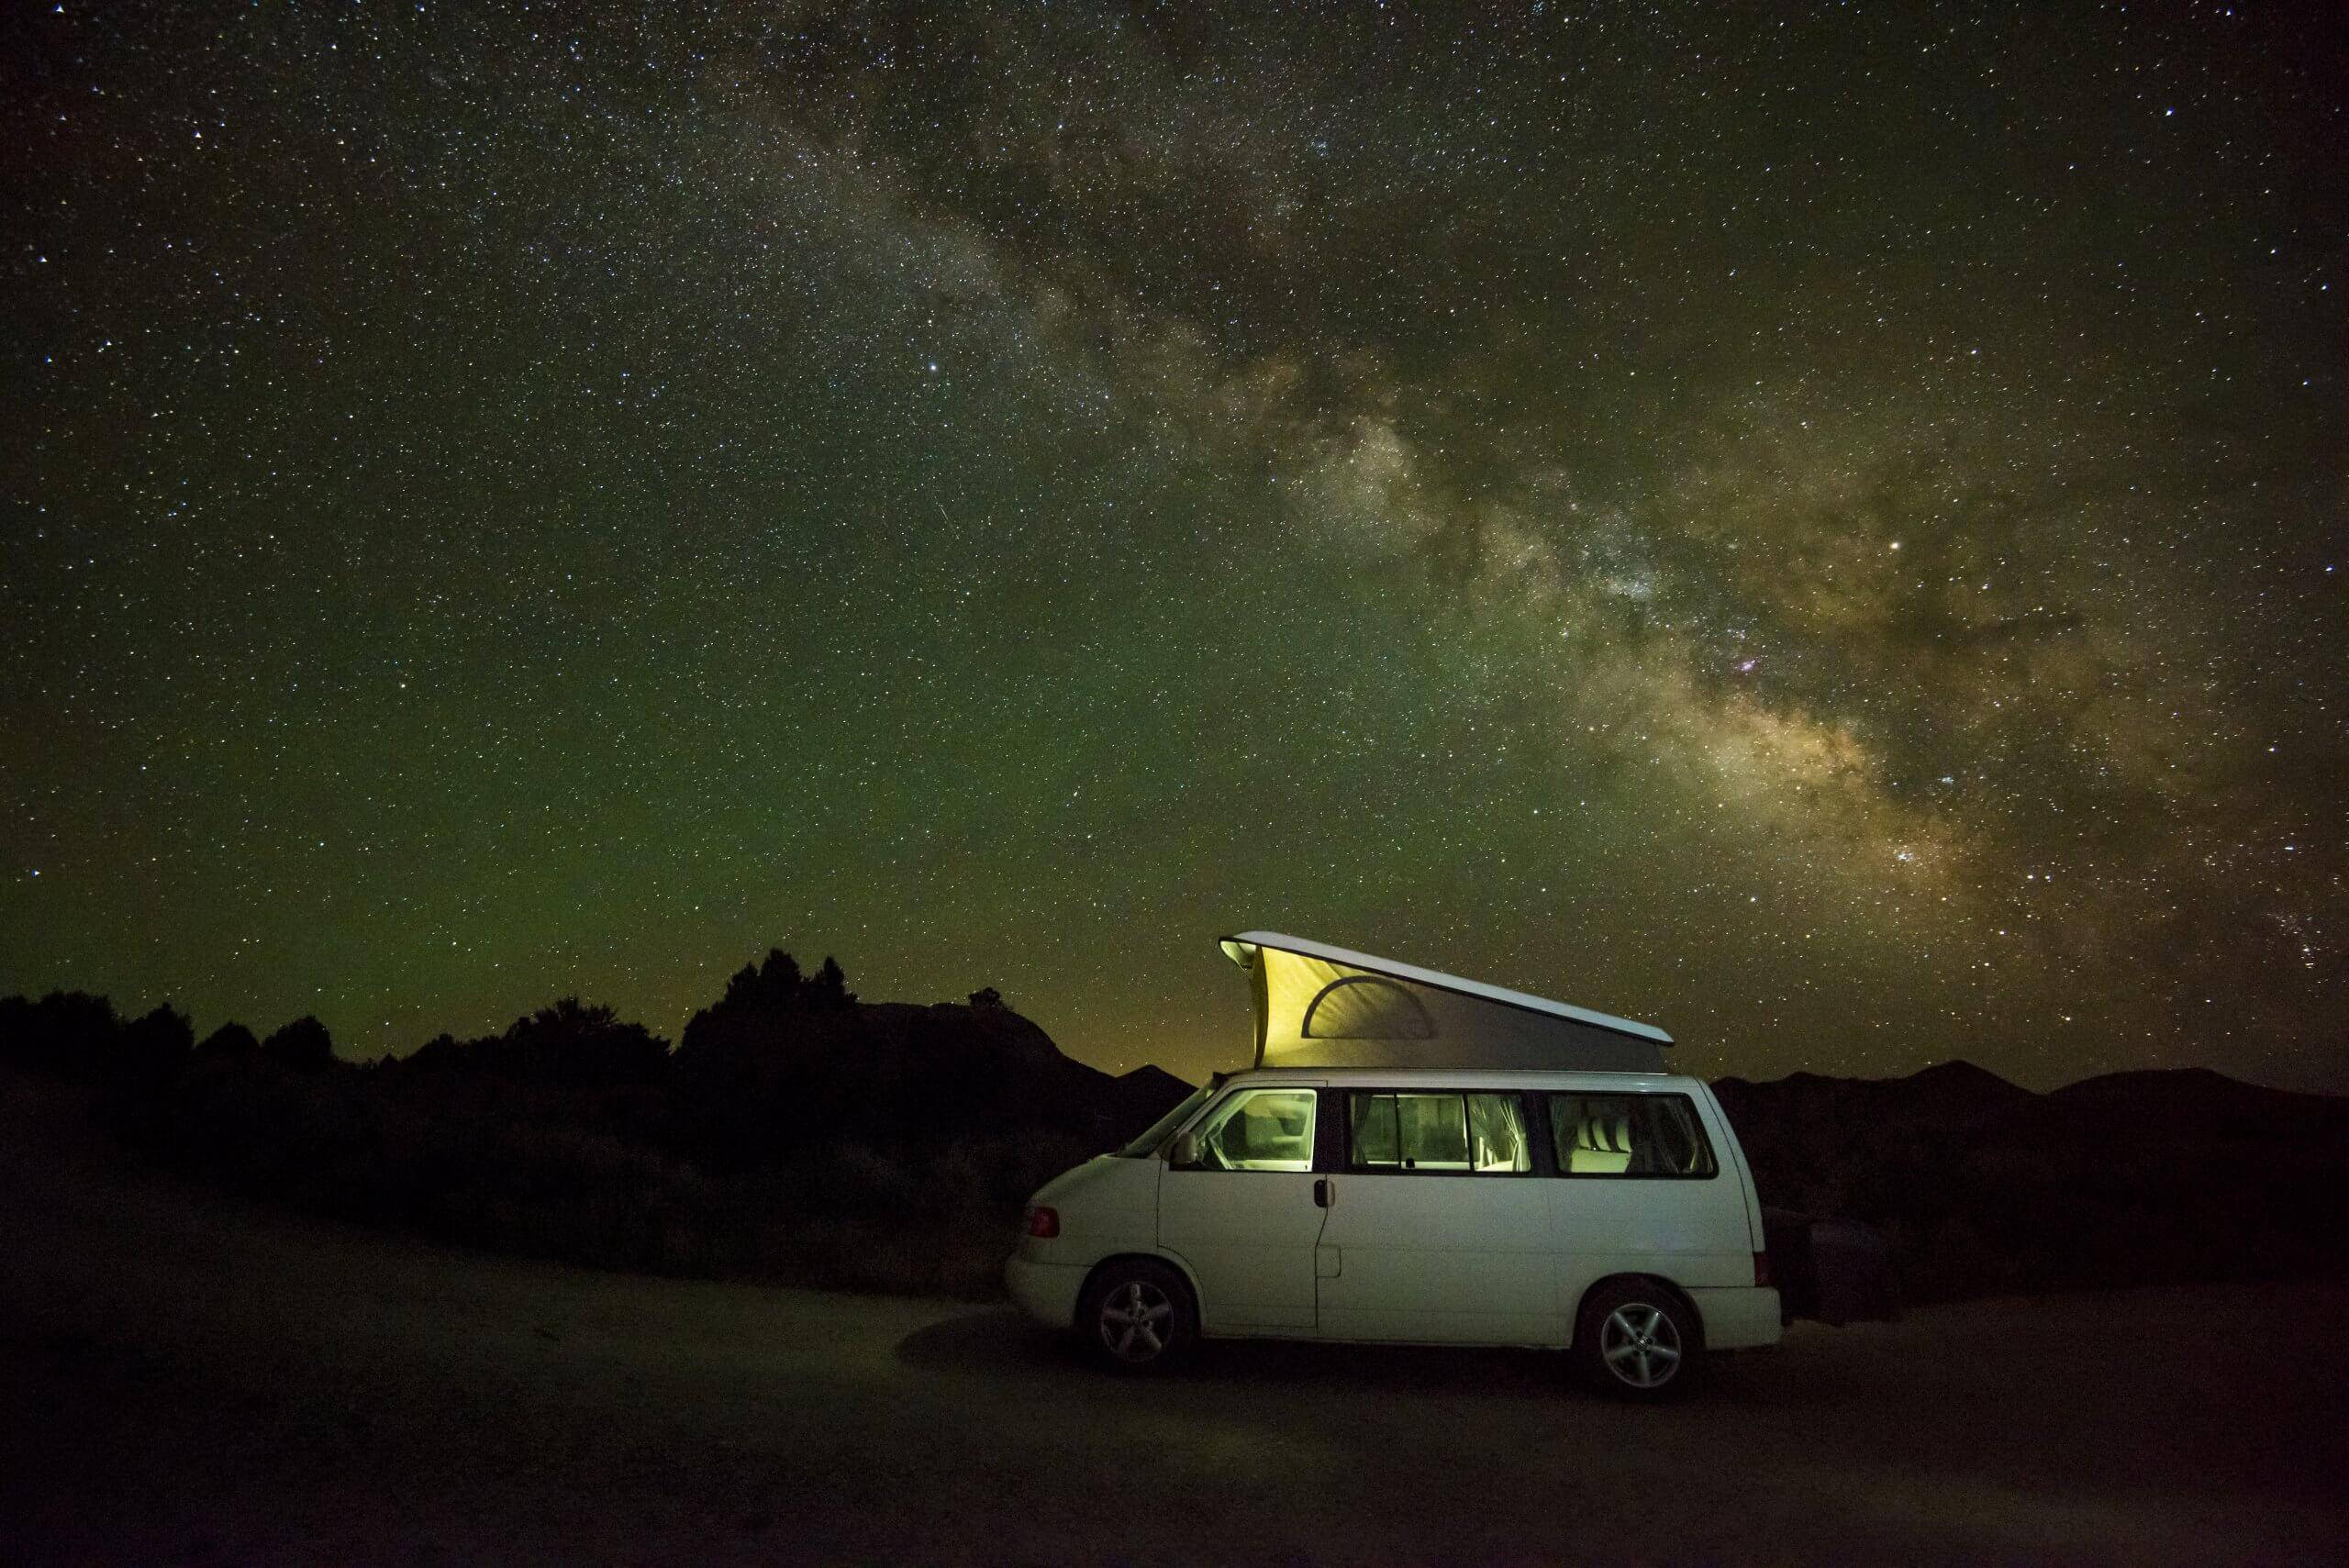 A camping van with a tent on the roof with the Milky Way seen in the starry night sky.